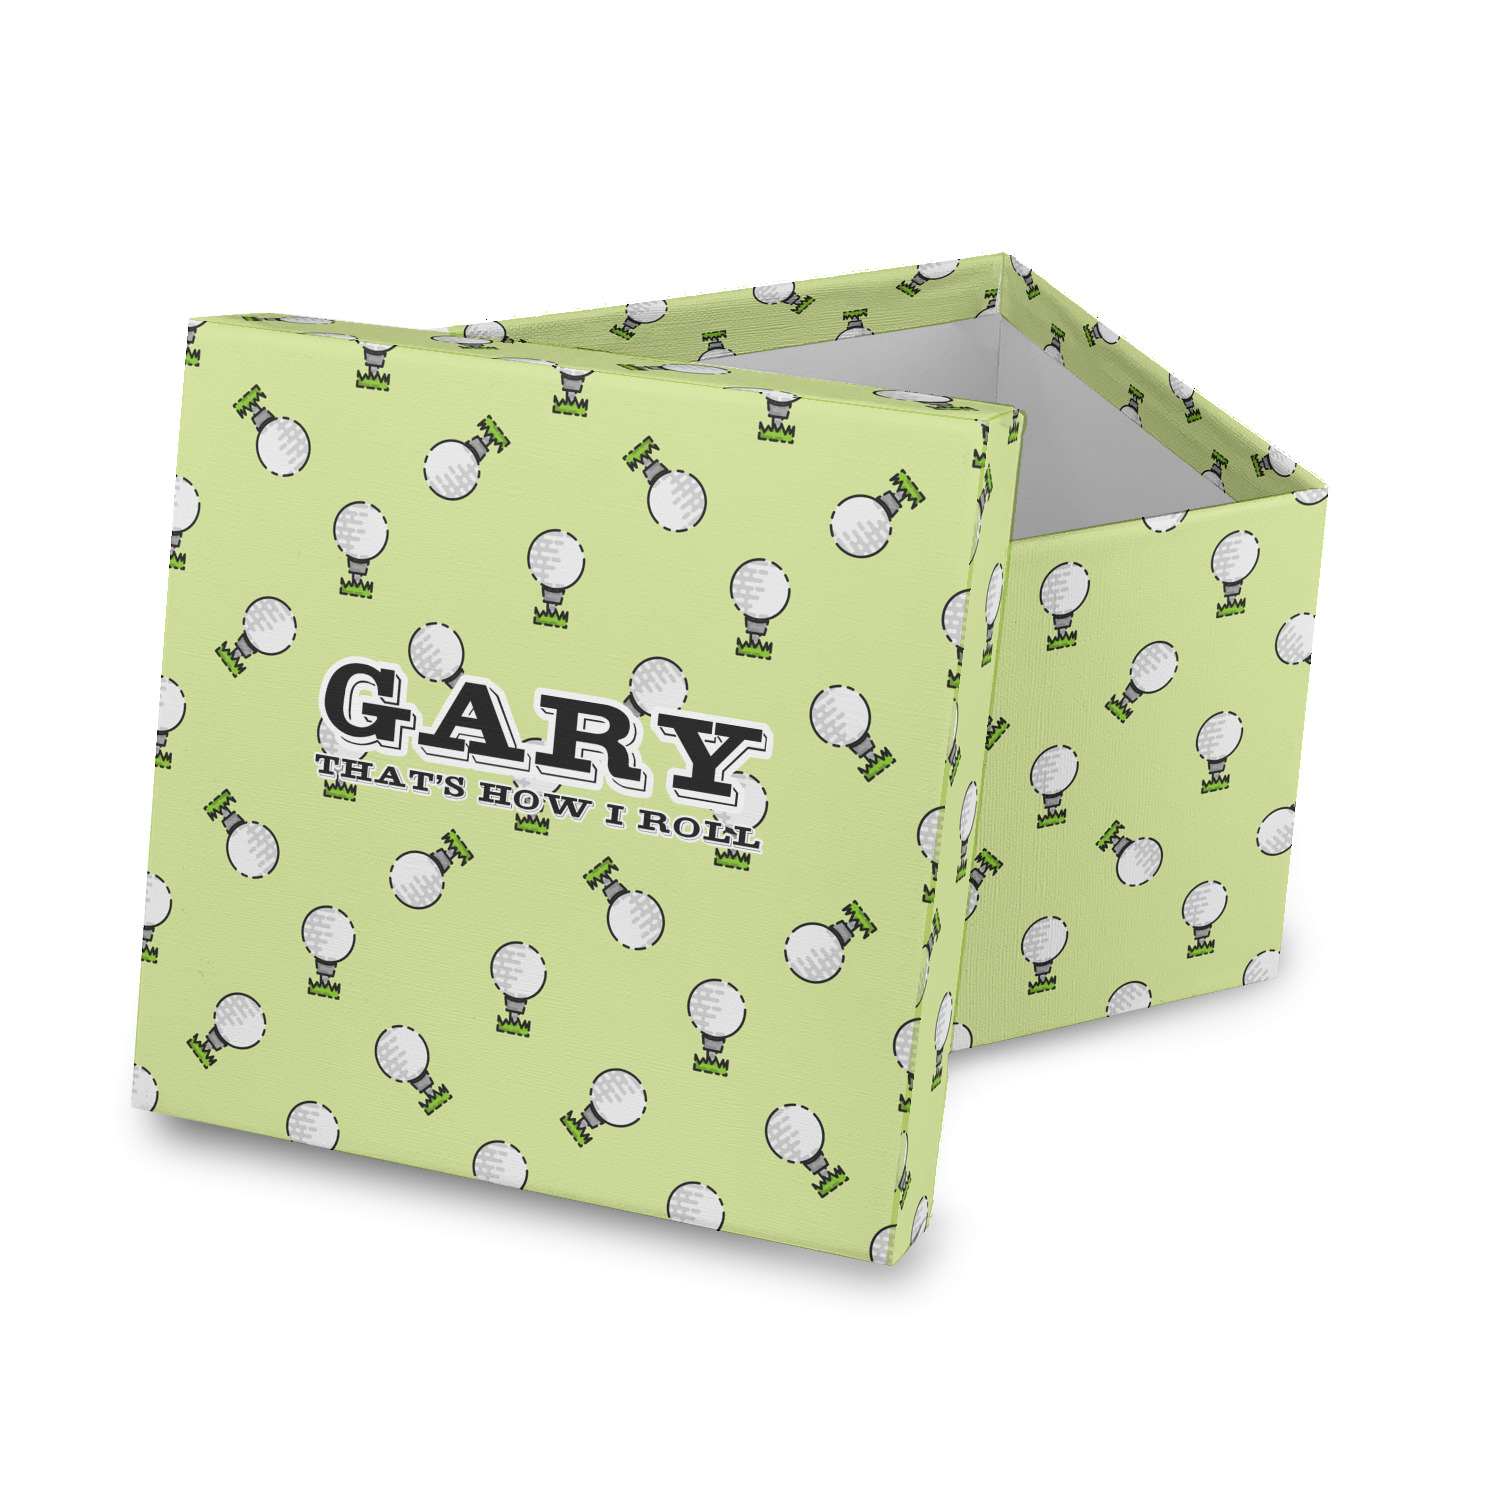 https://www.youcustomizeit.com/common/MAKE/1844584/Golf-Gift-Boxes-with-Lid-Parent-Main.jpg?lm=1649283069